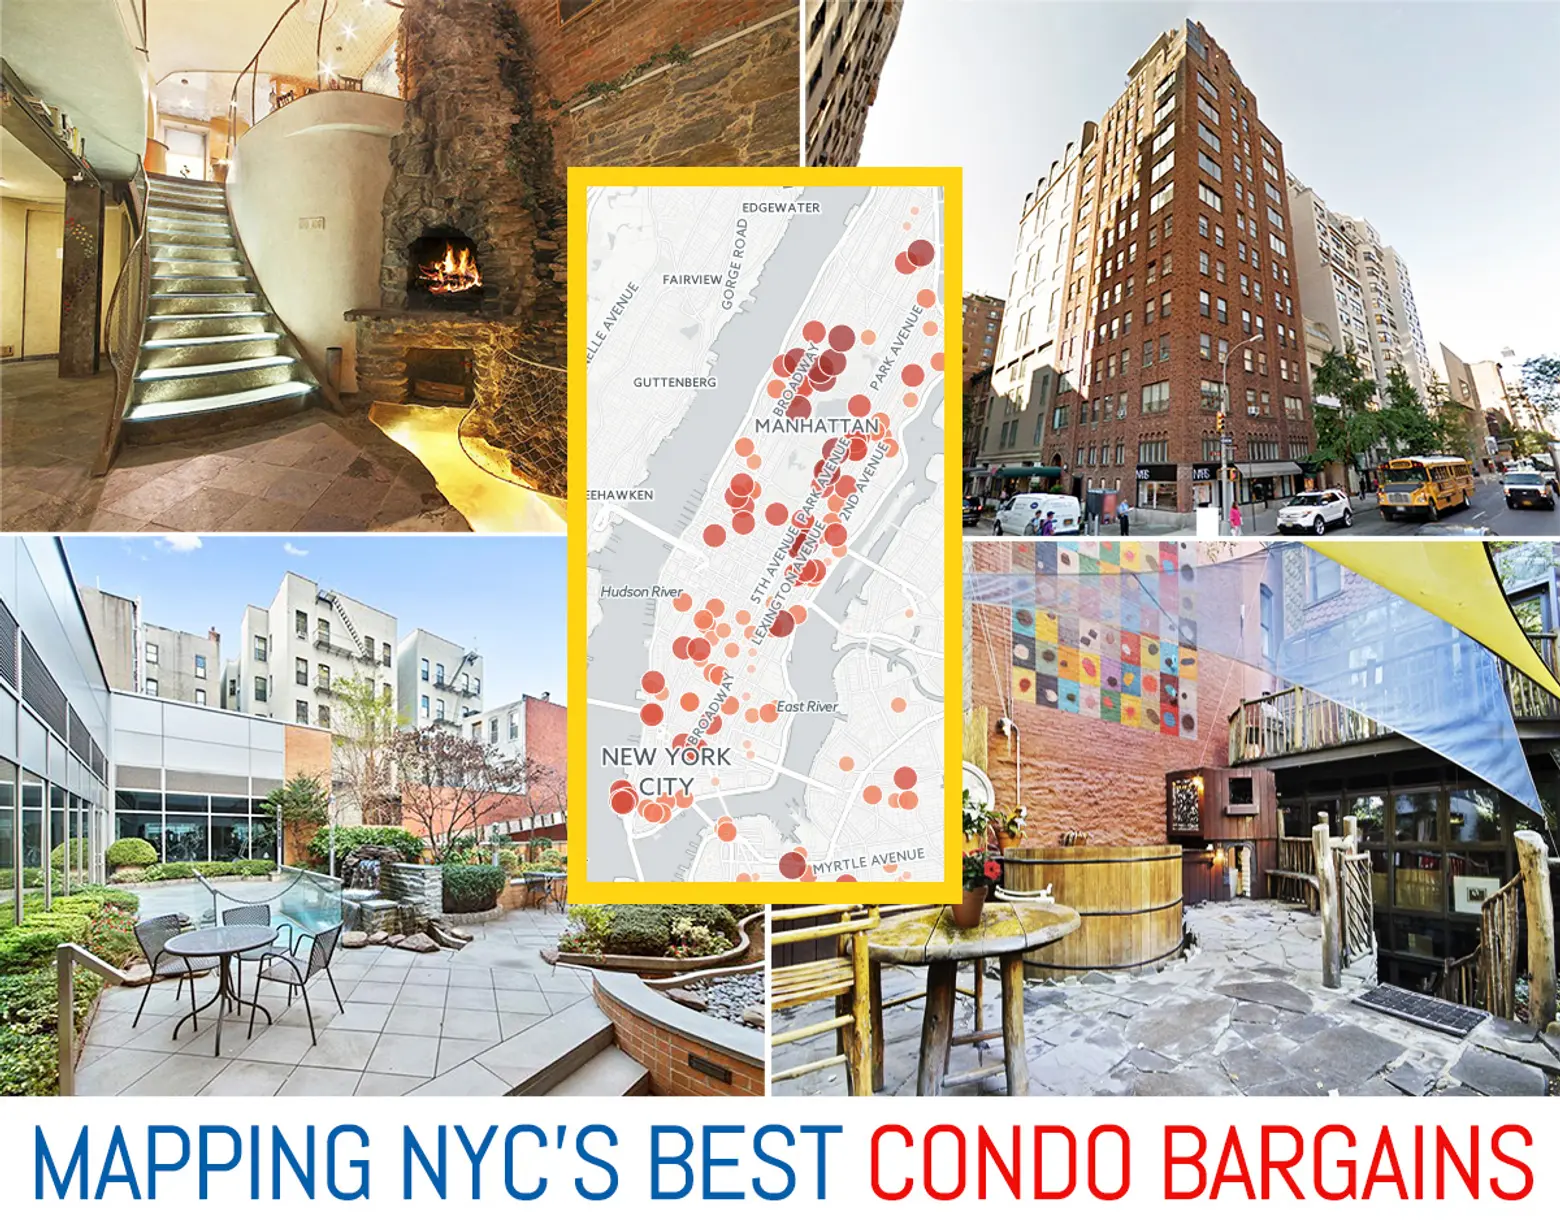 MAPS: Where to Find the Five Best Condo Bargains in Every NYC Neighborhood